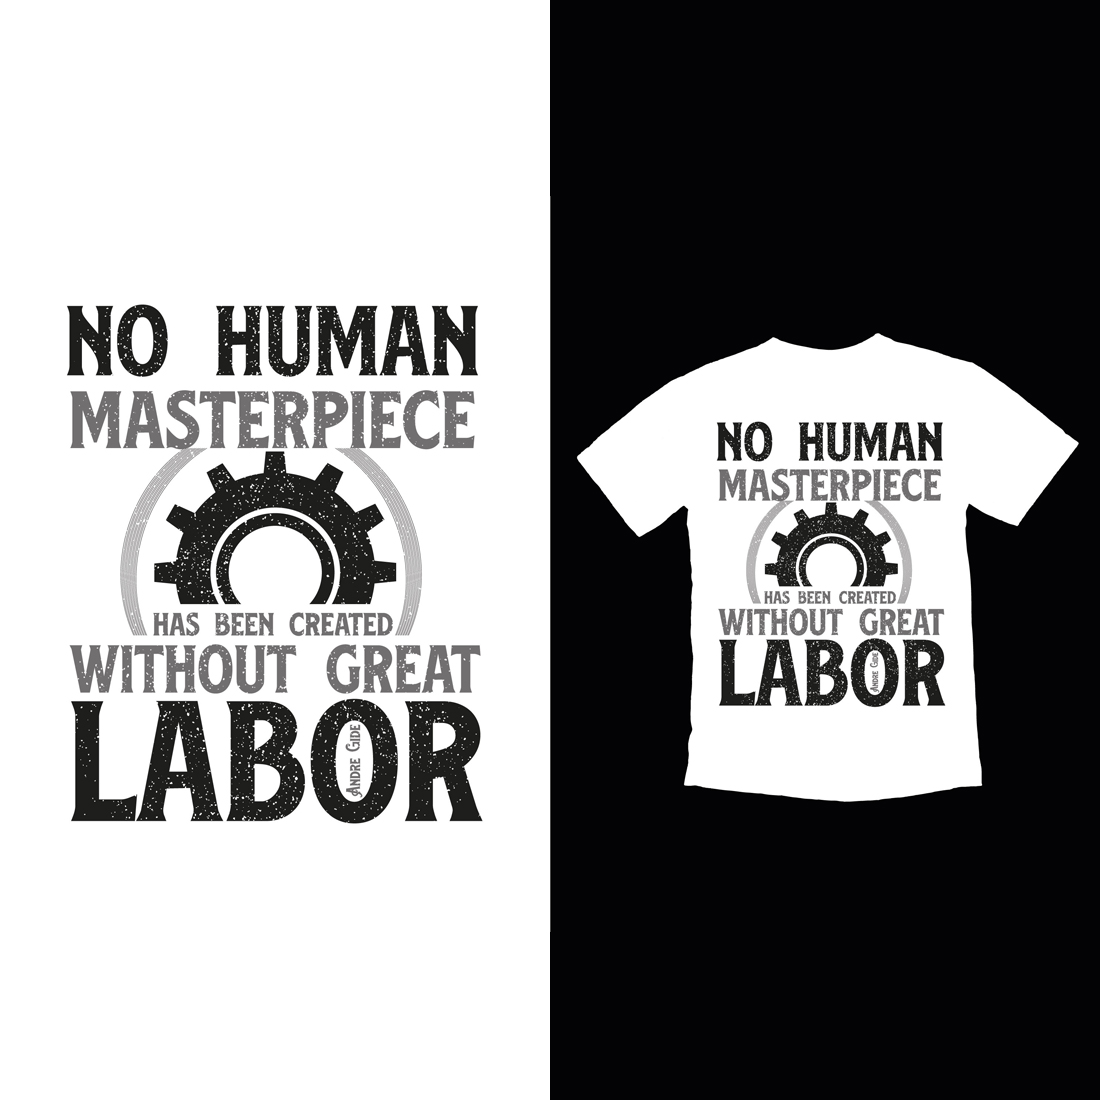 T - shirt that says no human masterpiece without great labor.